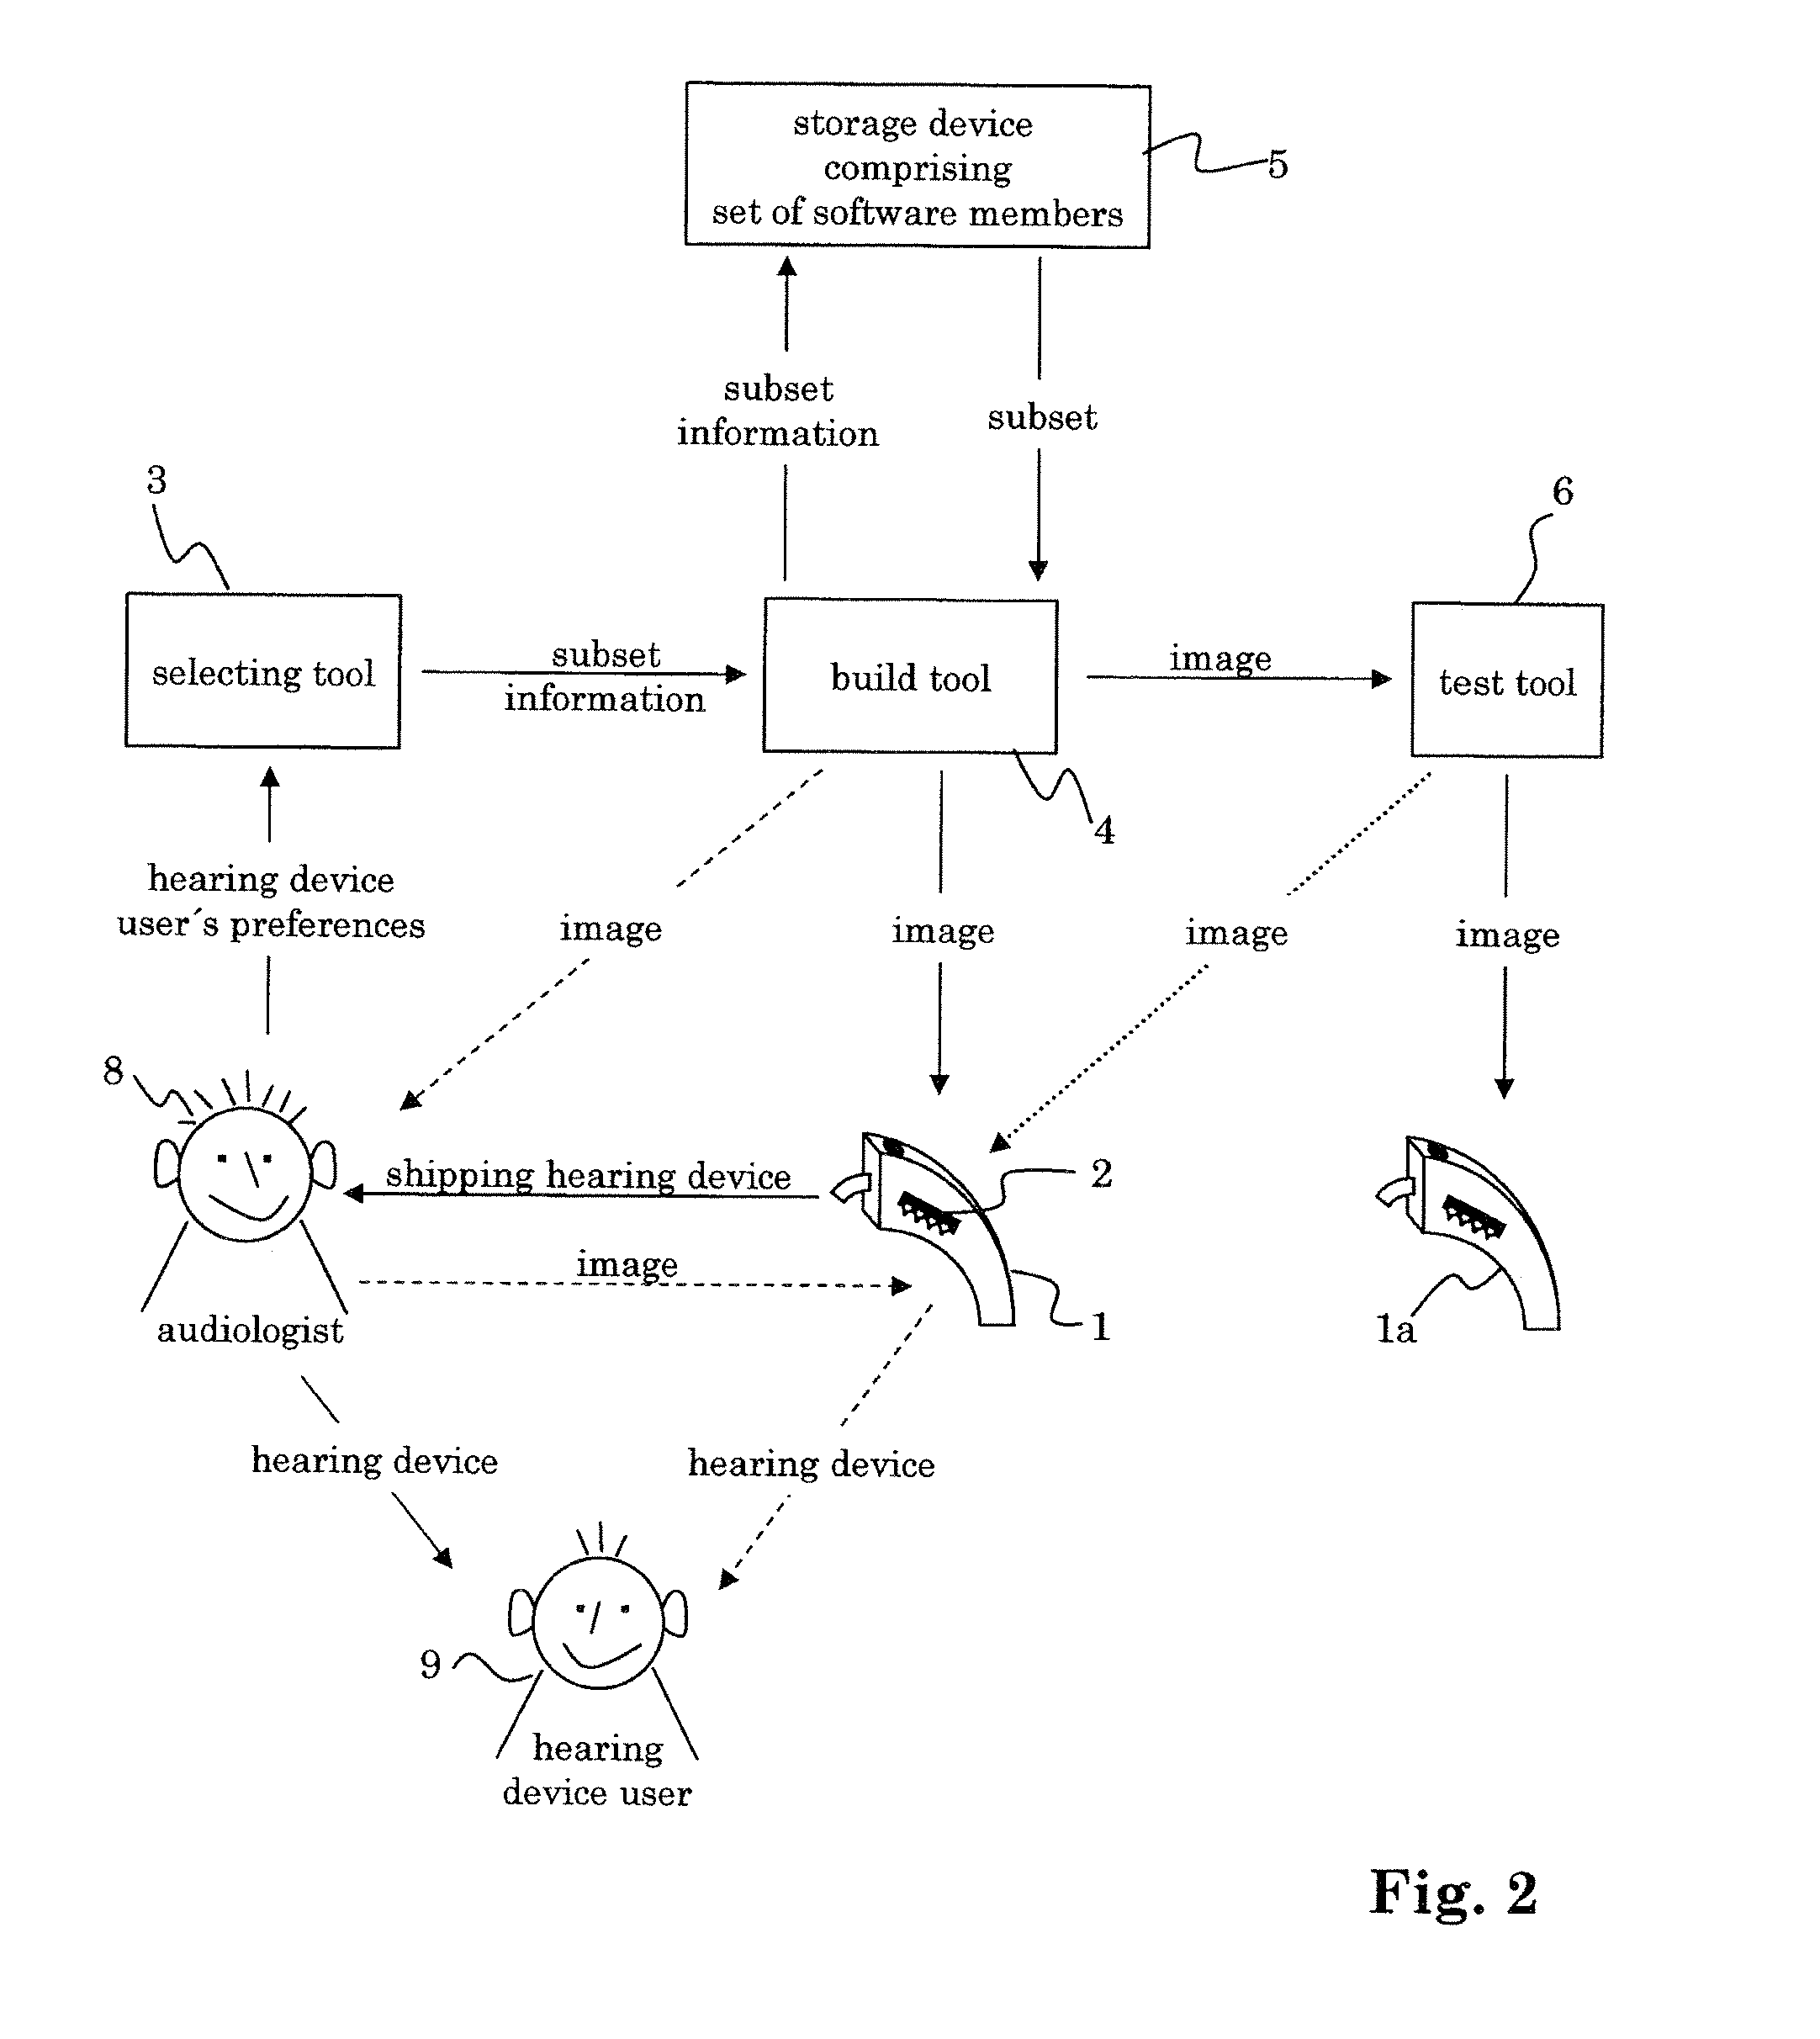 Method and system for manufacturing a hearing device with a customized feature set